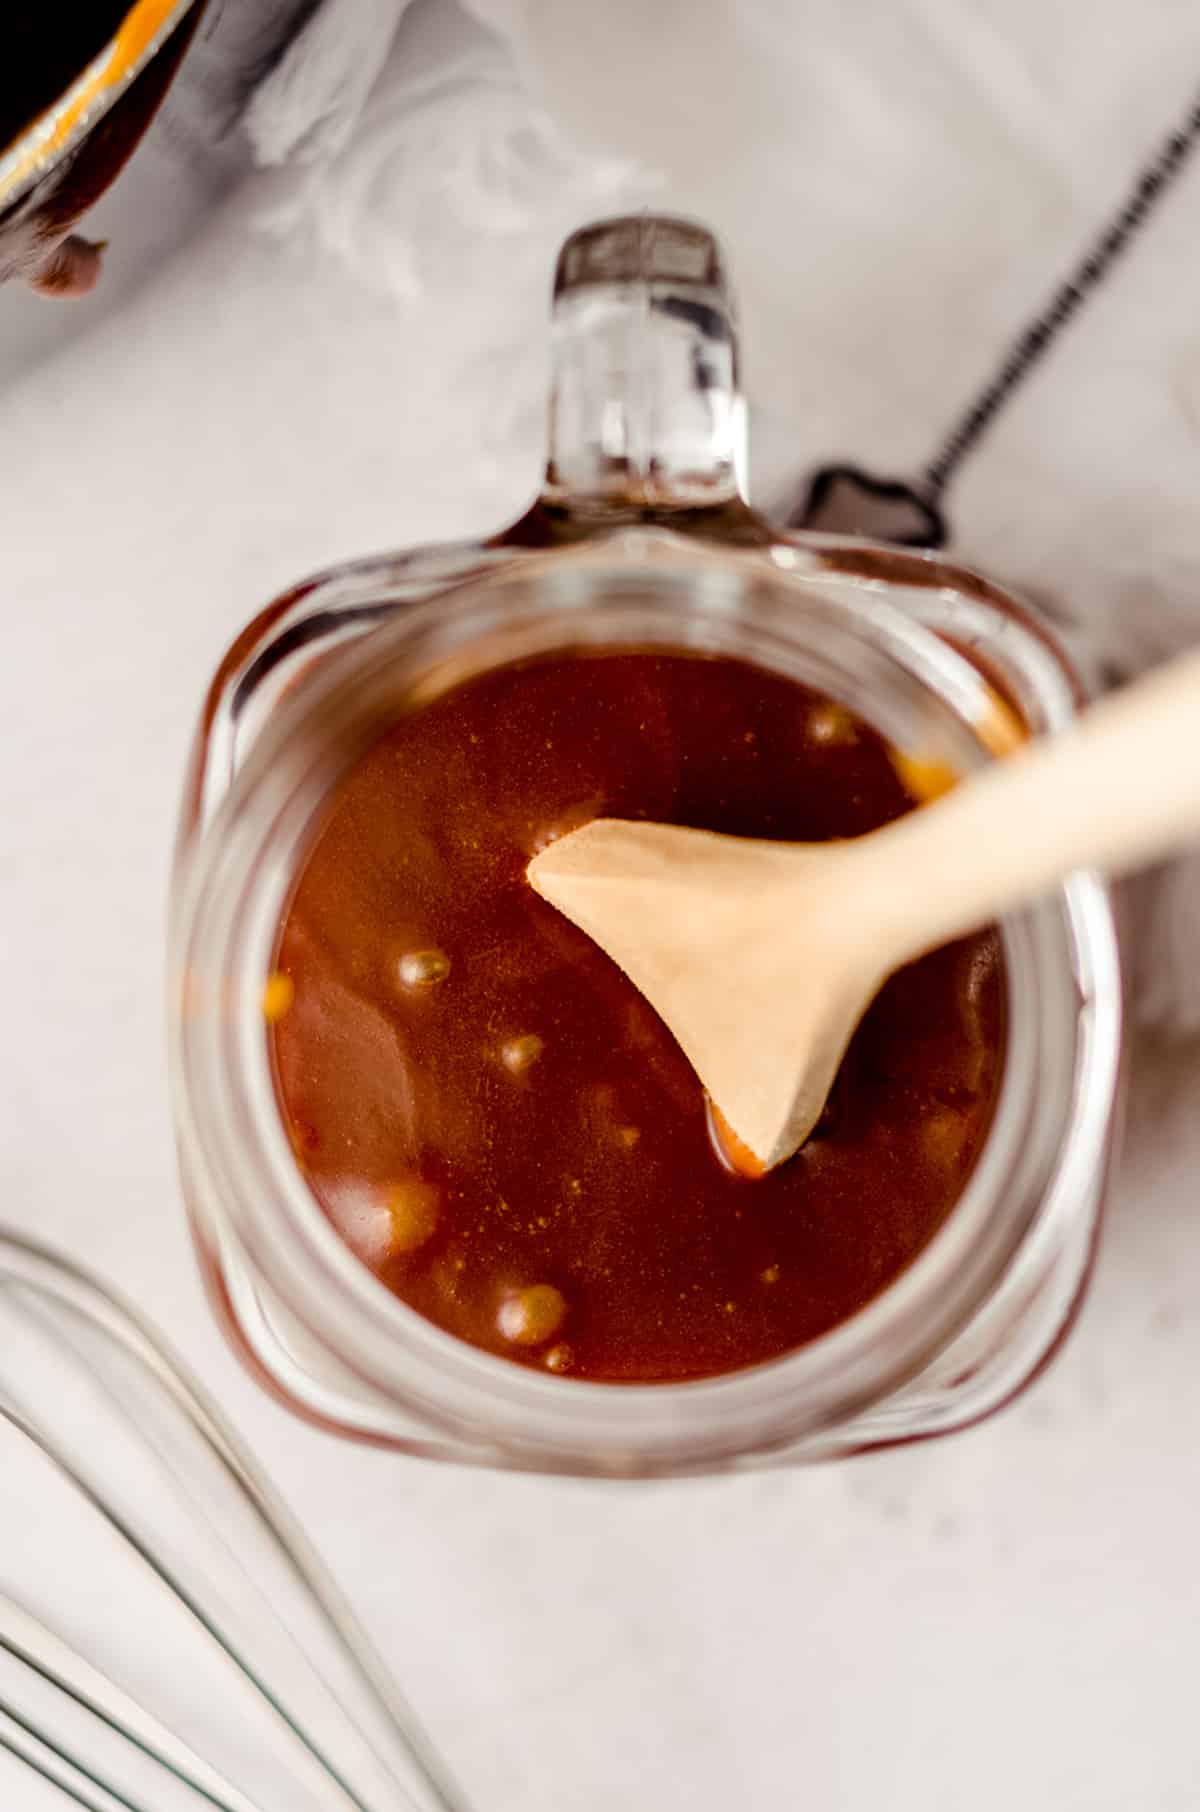 aerial photo of a jar of salted caramel sauce with a wooden spoon sitting in it